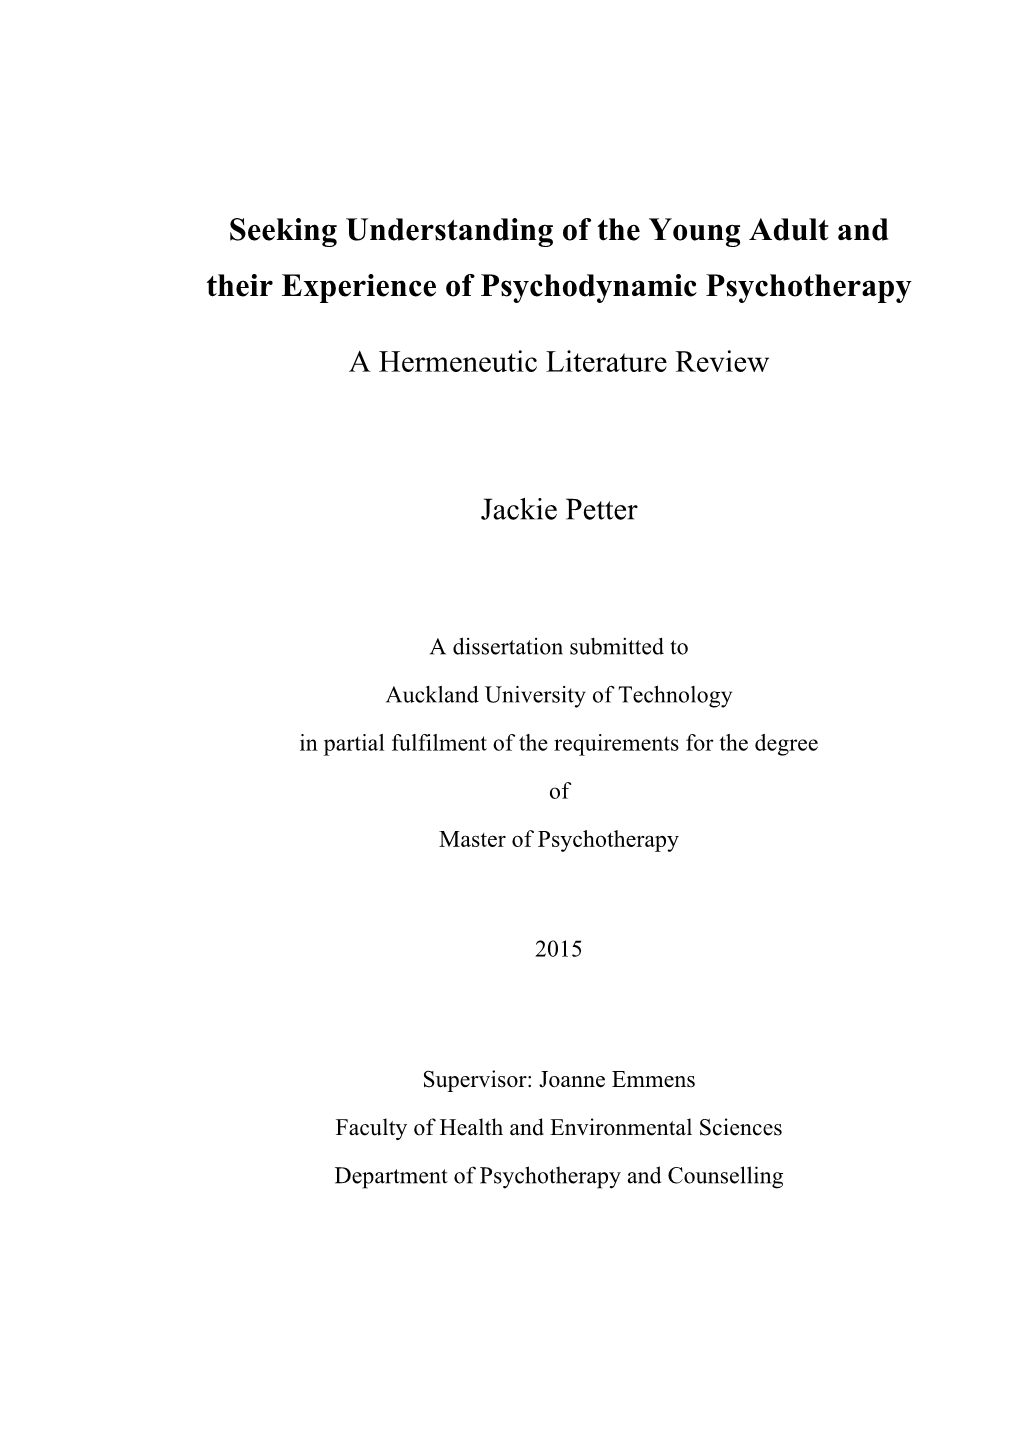 Seeking Understanding of the Young Adult and Their Experience of Psychodynamic Psychotherapy